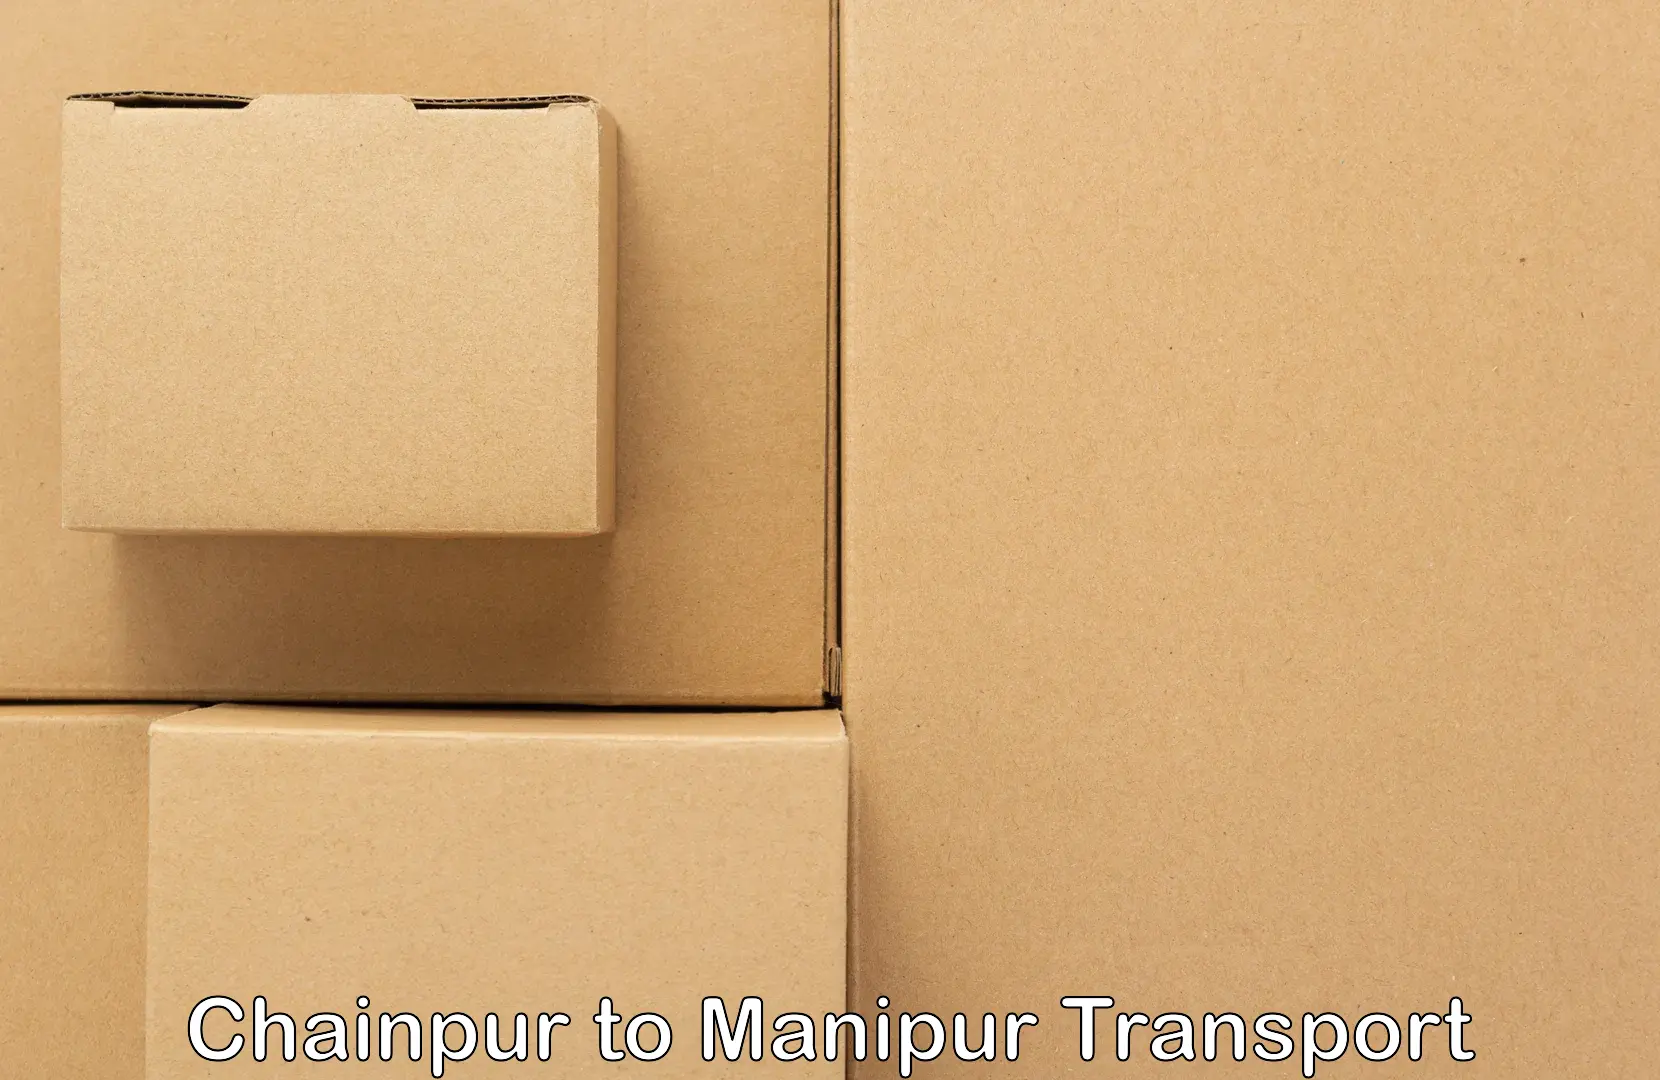 Delivery service Chainpur to Manipur